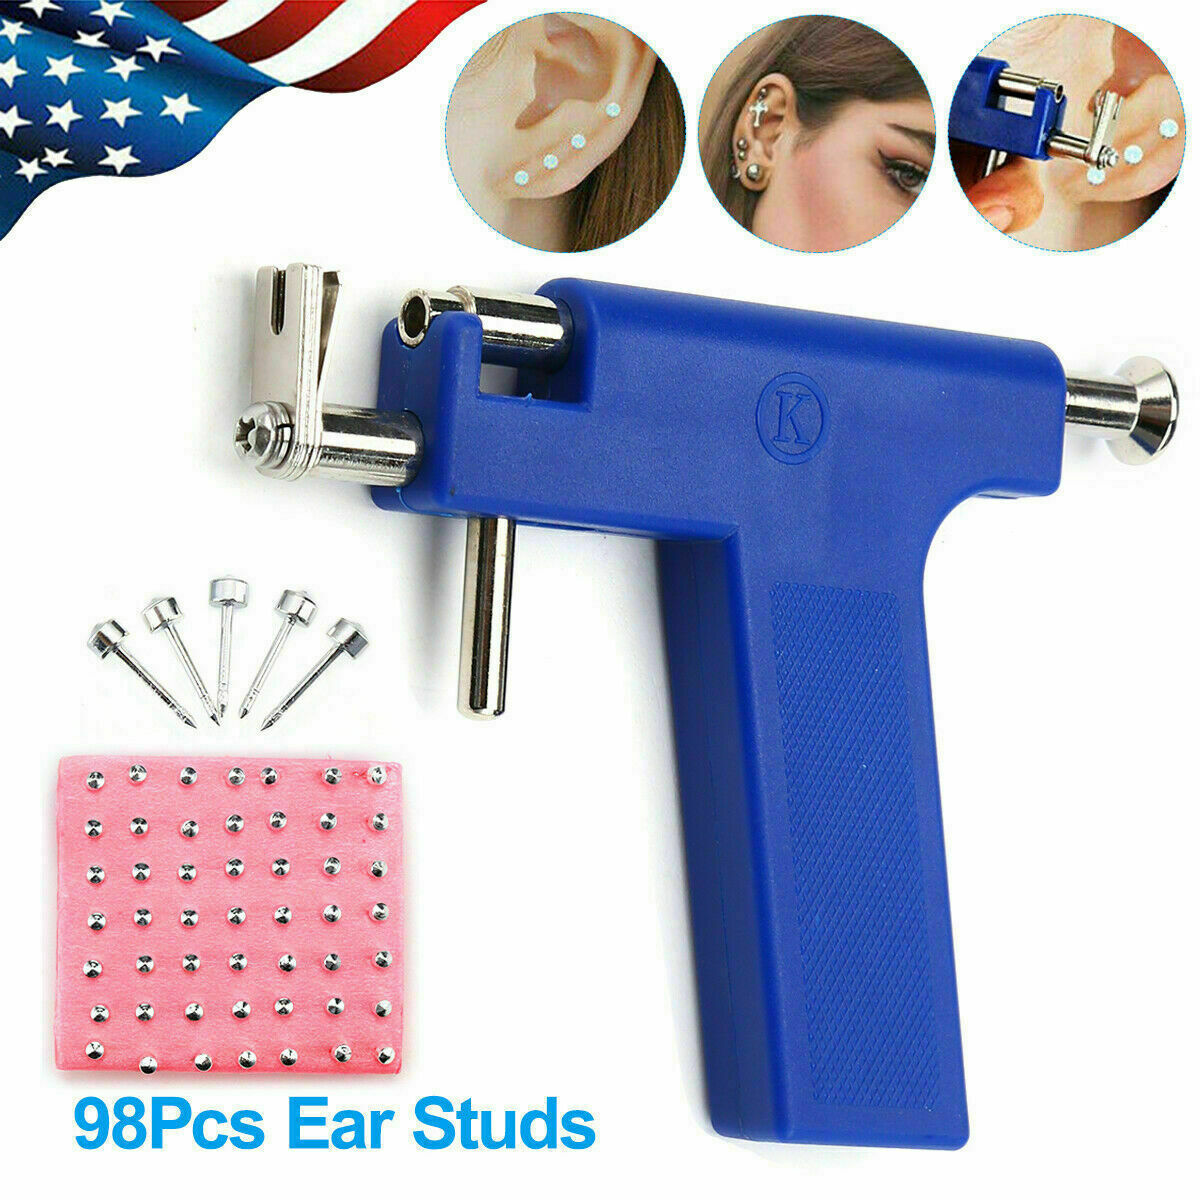 Professional Ear Nose Navel Body Piercing Gun Kit Tool with Pack Of 98 Studs AU